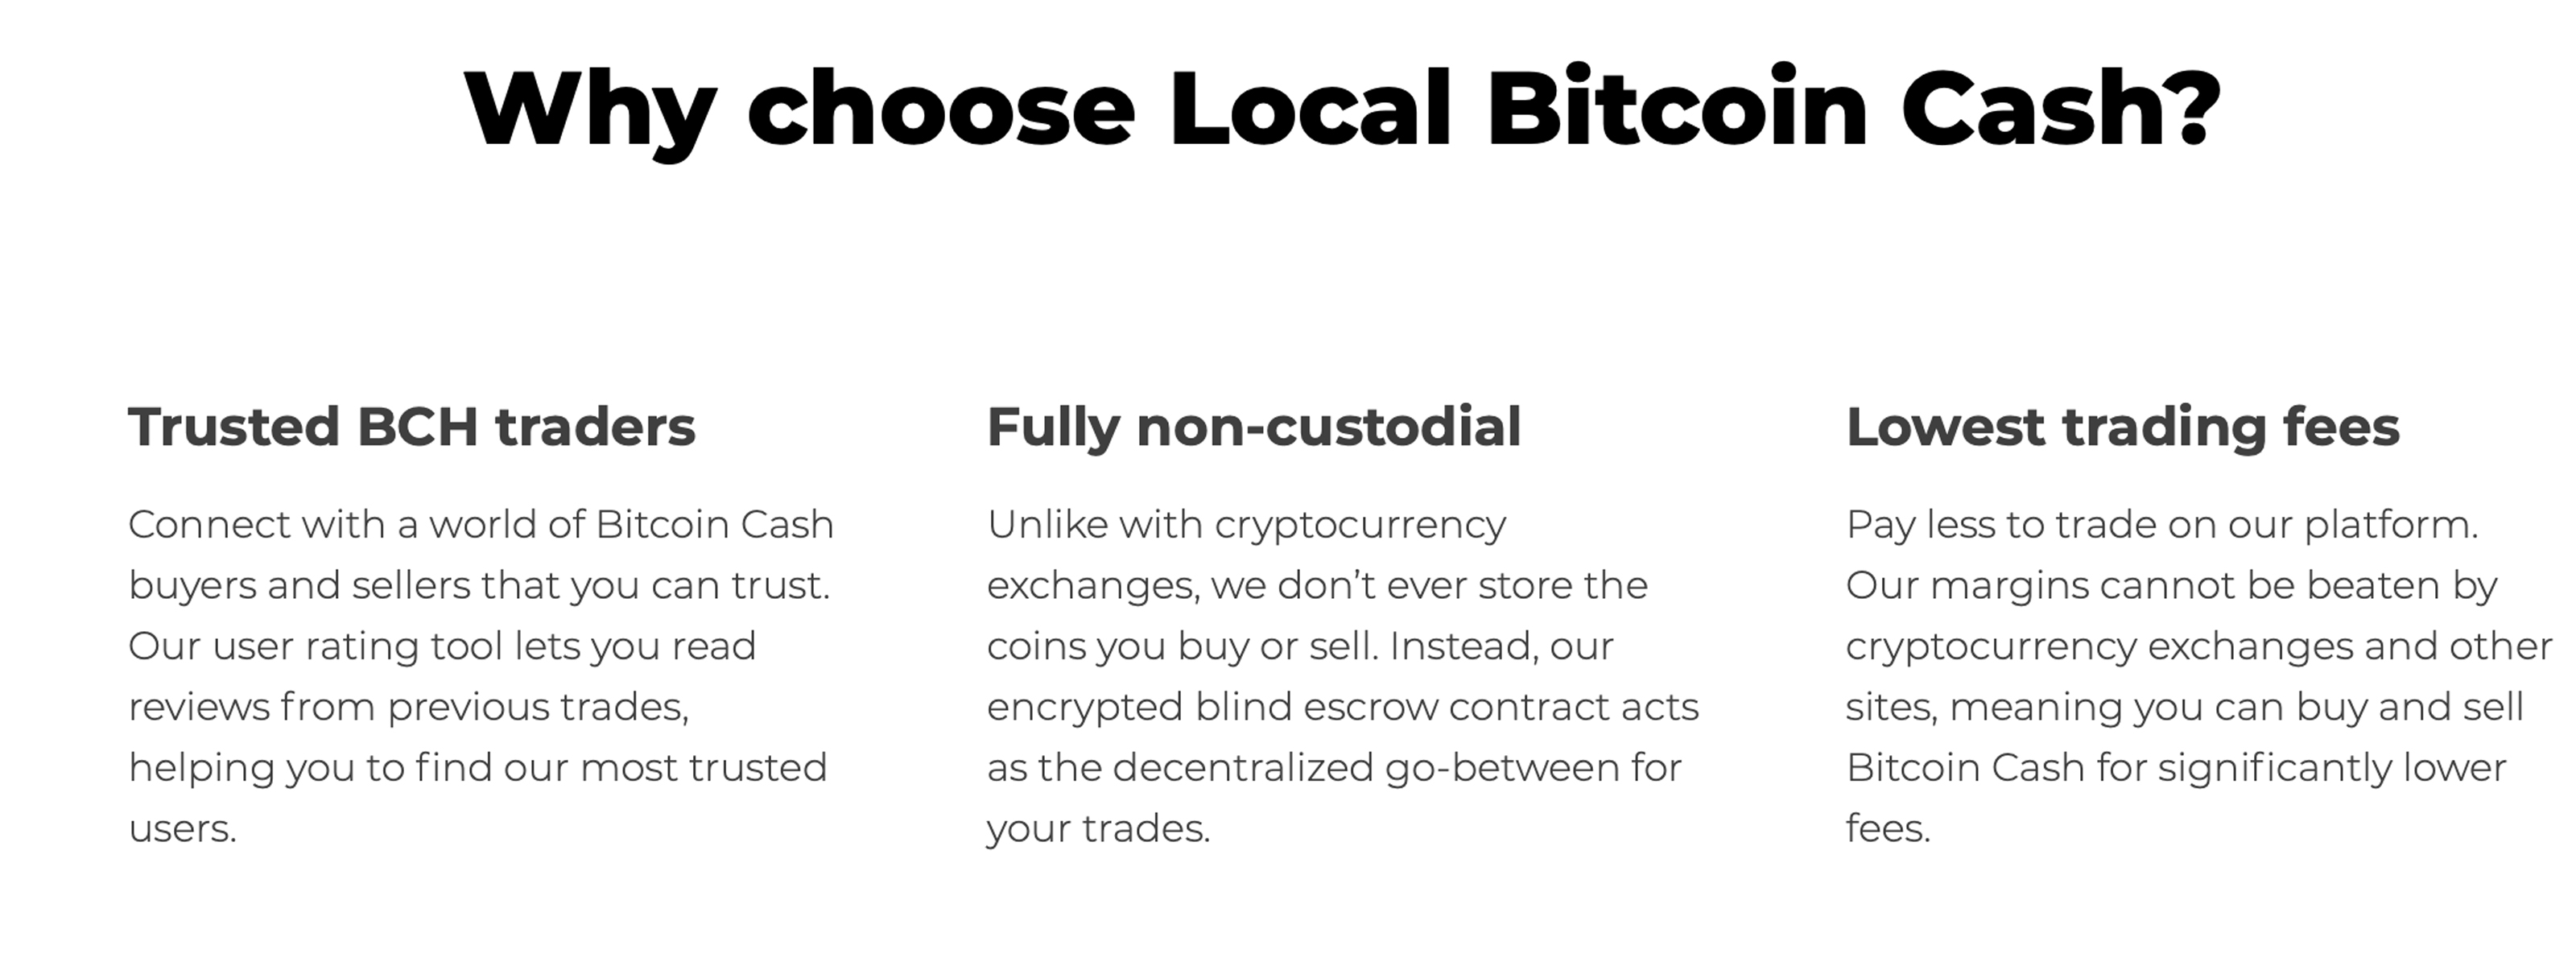 Bitcoin.com's Local Bitcoin Cash Marketplace Gathers Thousands of Pre-Launch Signups